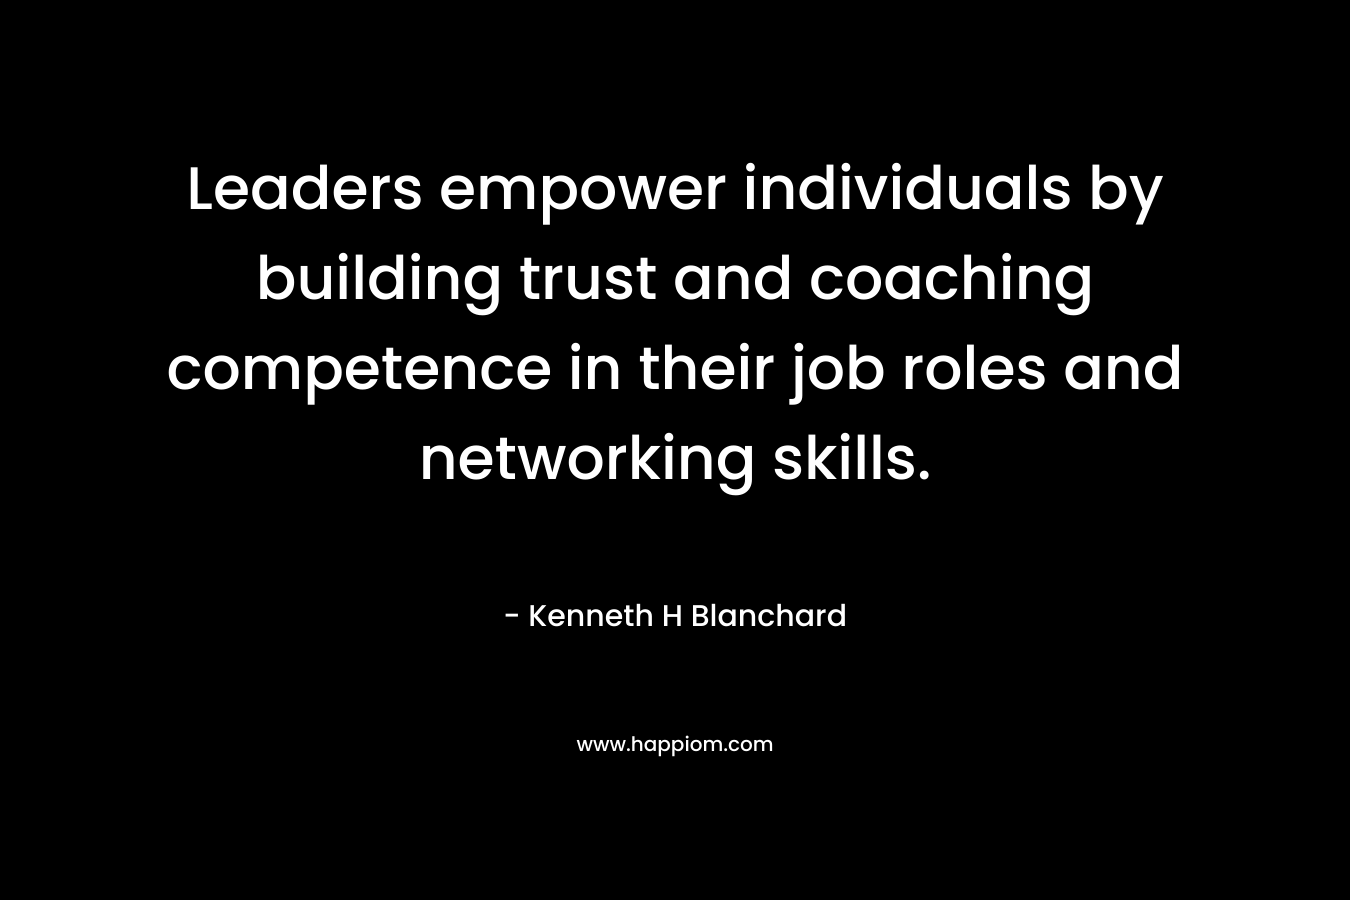 Leaders empower individuals by building trust and coaching competence in their job roles and networking skills. – Kenneth H Blanchard